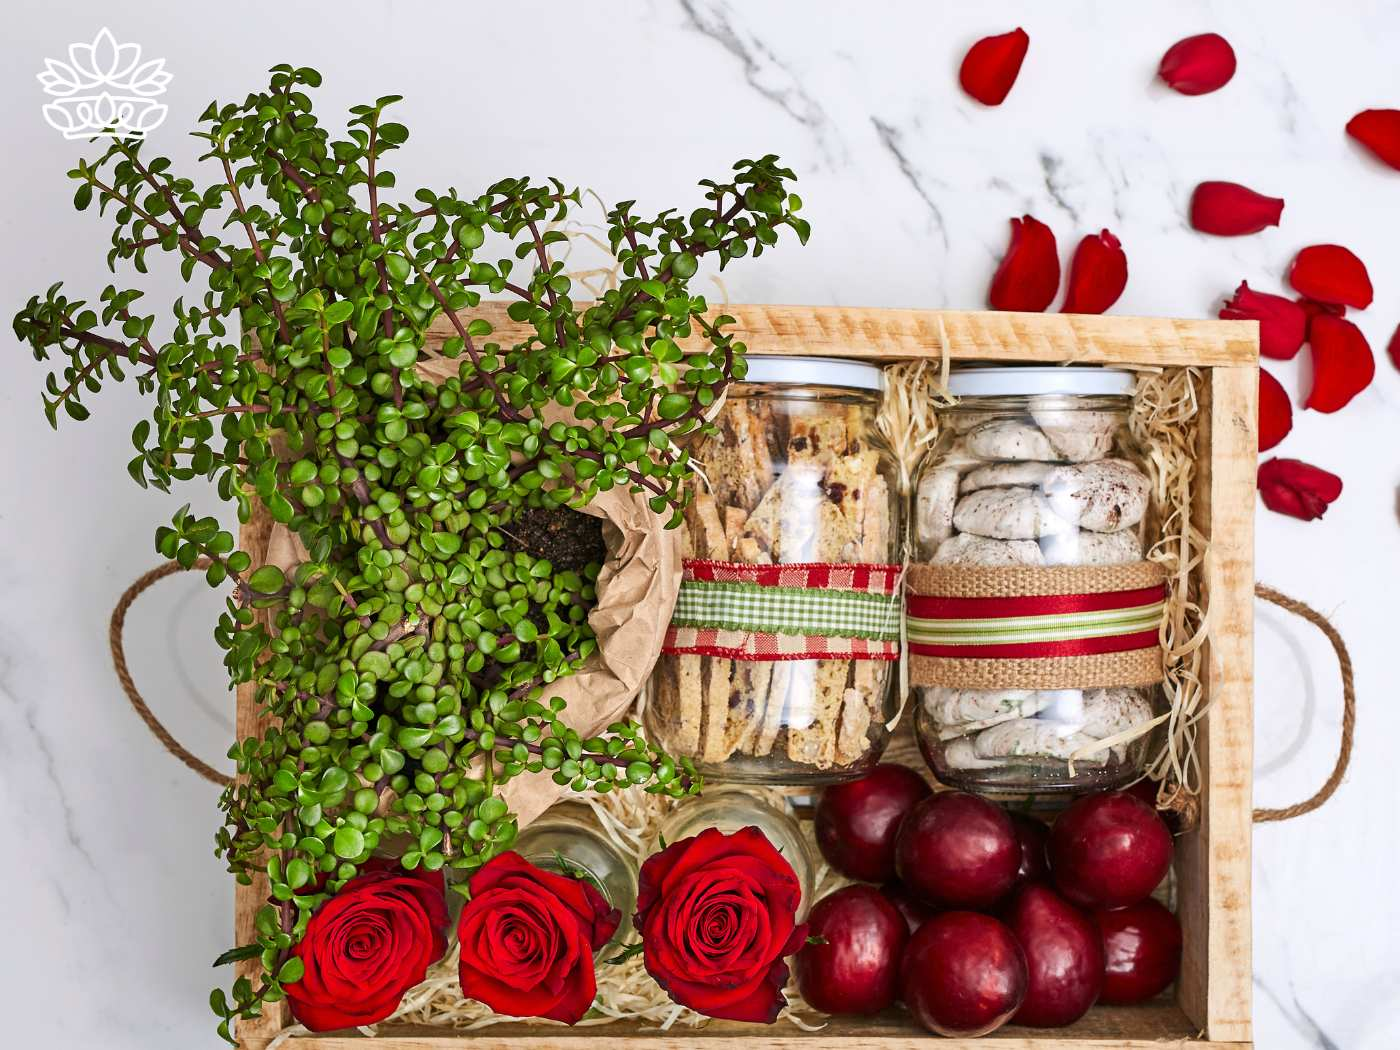 Decorative gift basket featuring a lush green plant, jars of biscotti and meringues, fresh red apples, and vibrant red roses, all beautifully arranged in a rustic wooden tray surrounded by scattered rose petals. A thoughtful creation by Fabulous Flowers and Gifts, designed to add a personal and luxurious touch to guest house and hotel accommodations